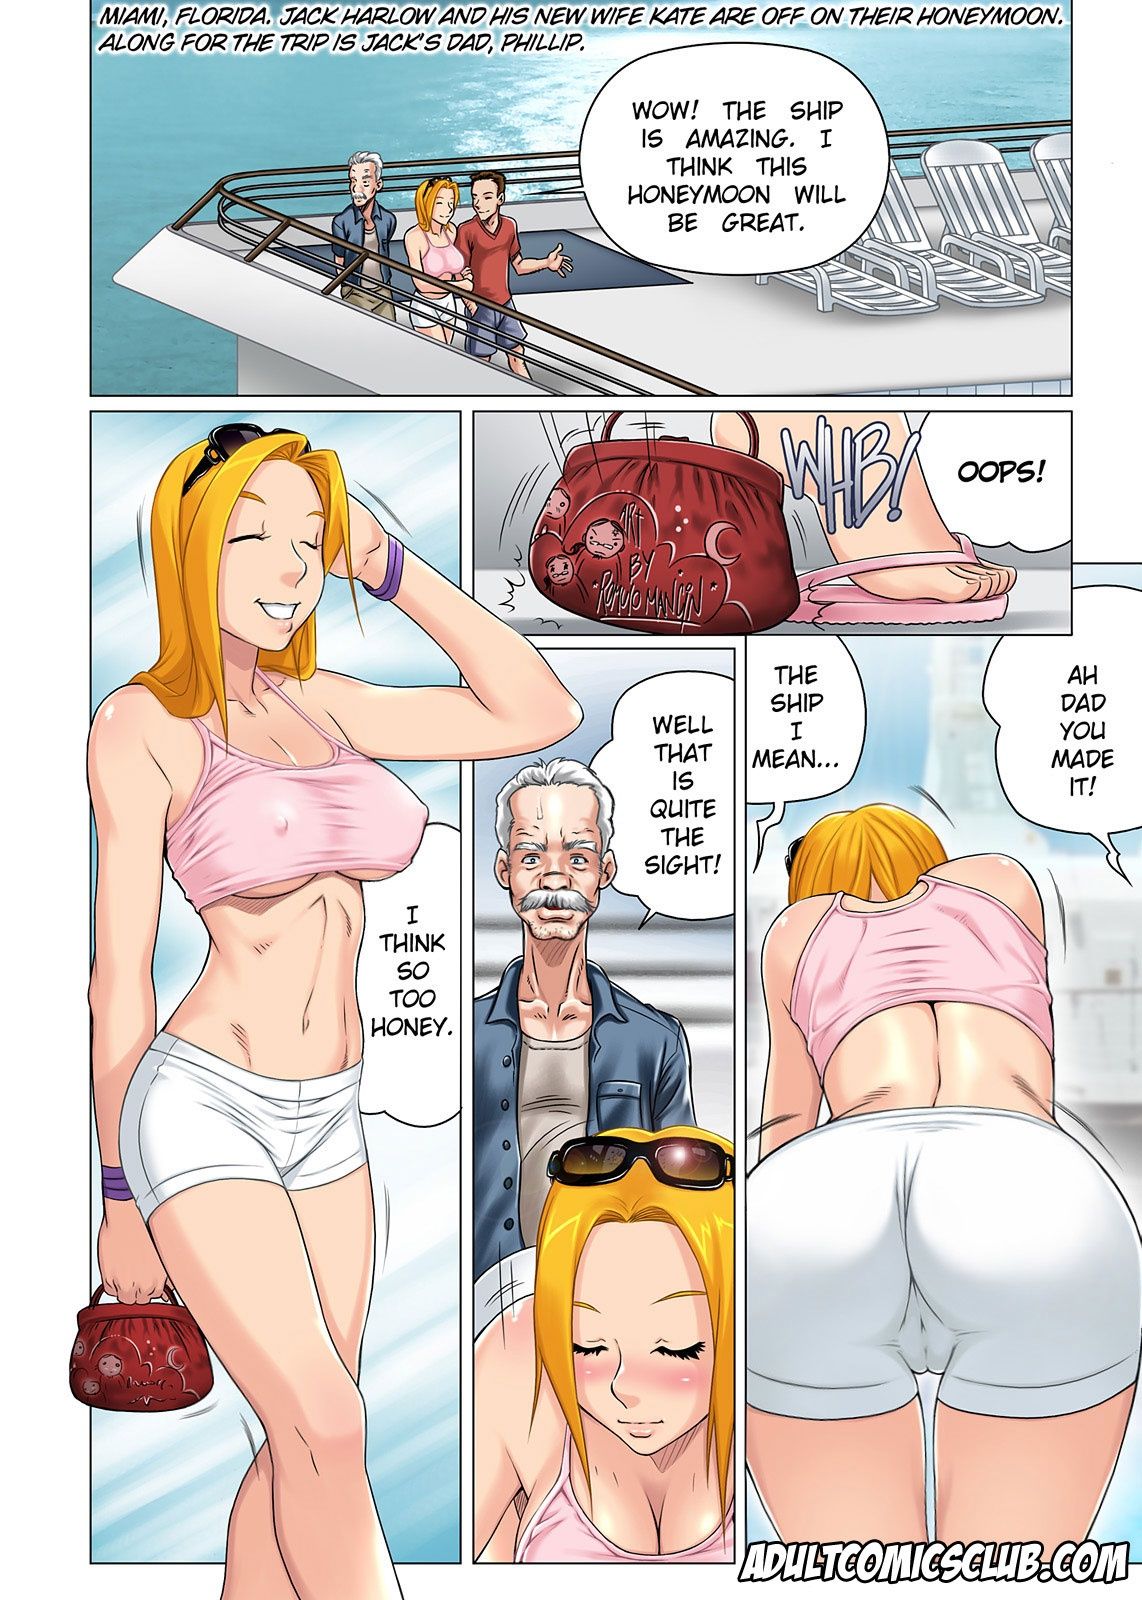 Another horny father in-law porn comic